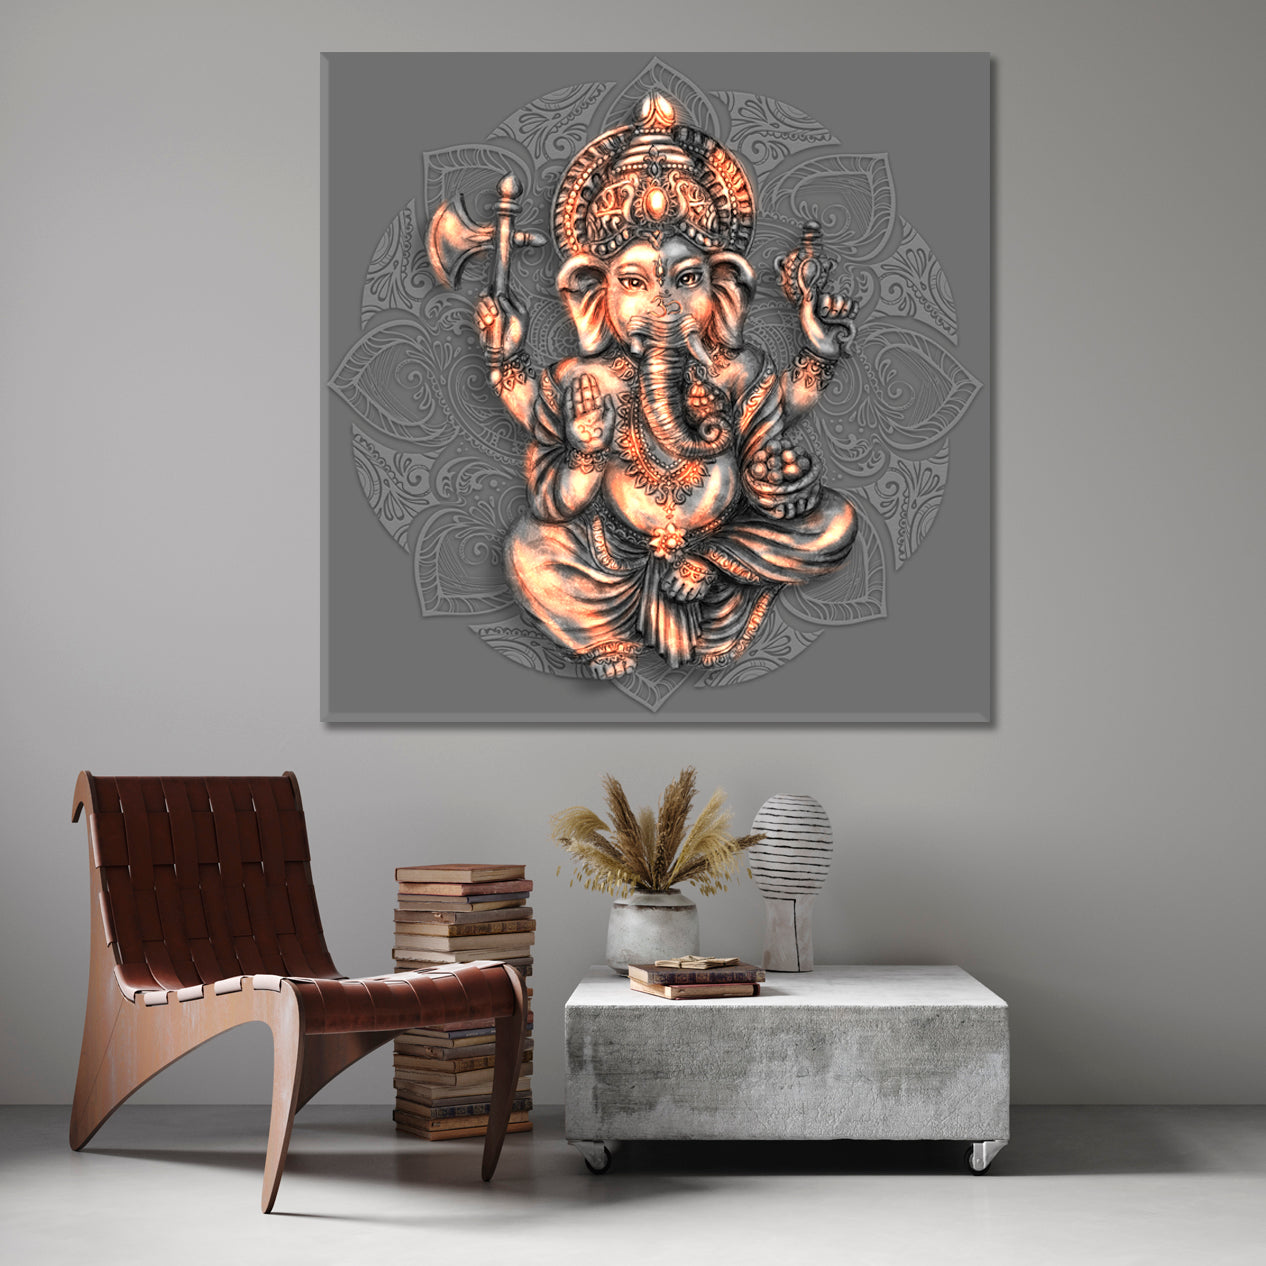 Ganesh Hindu God Lord of Wisdom and Well-being Religious Modern Art Artesty 1 Panel 12"x12" 